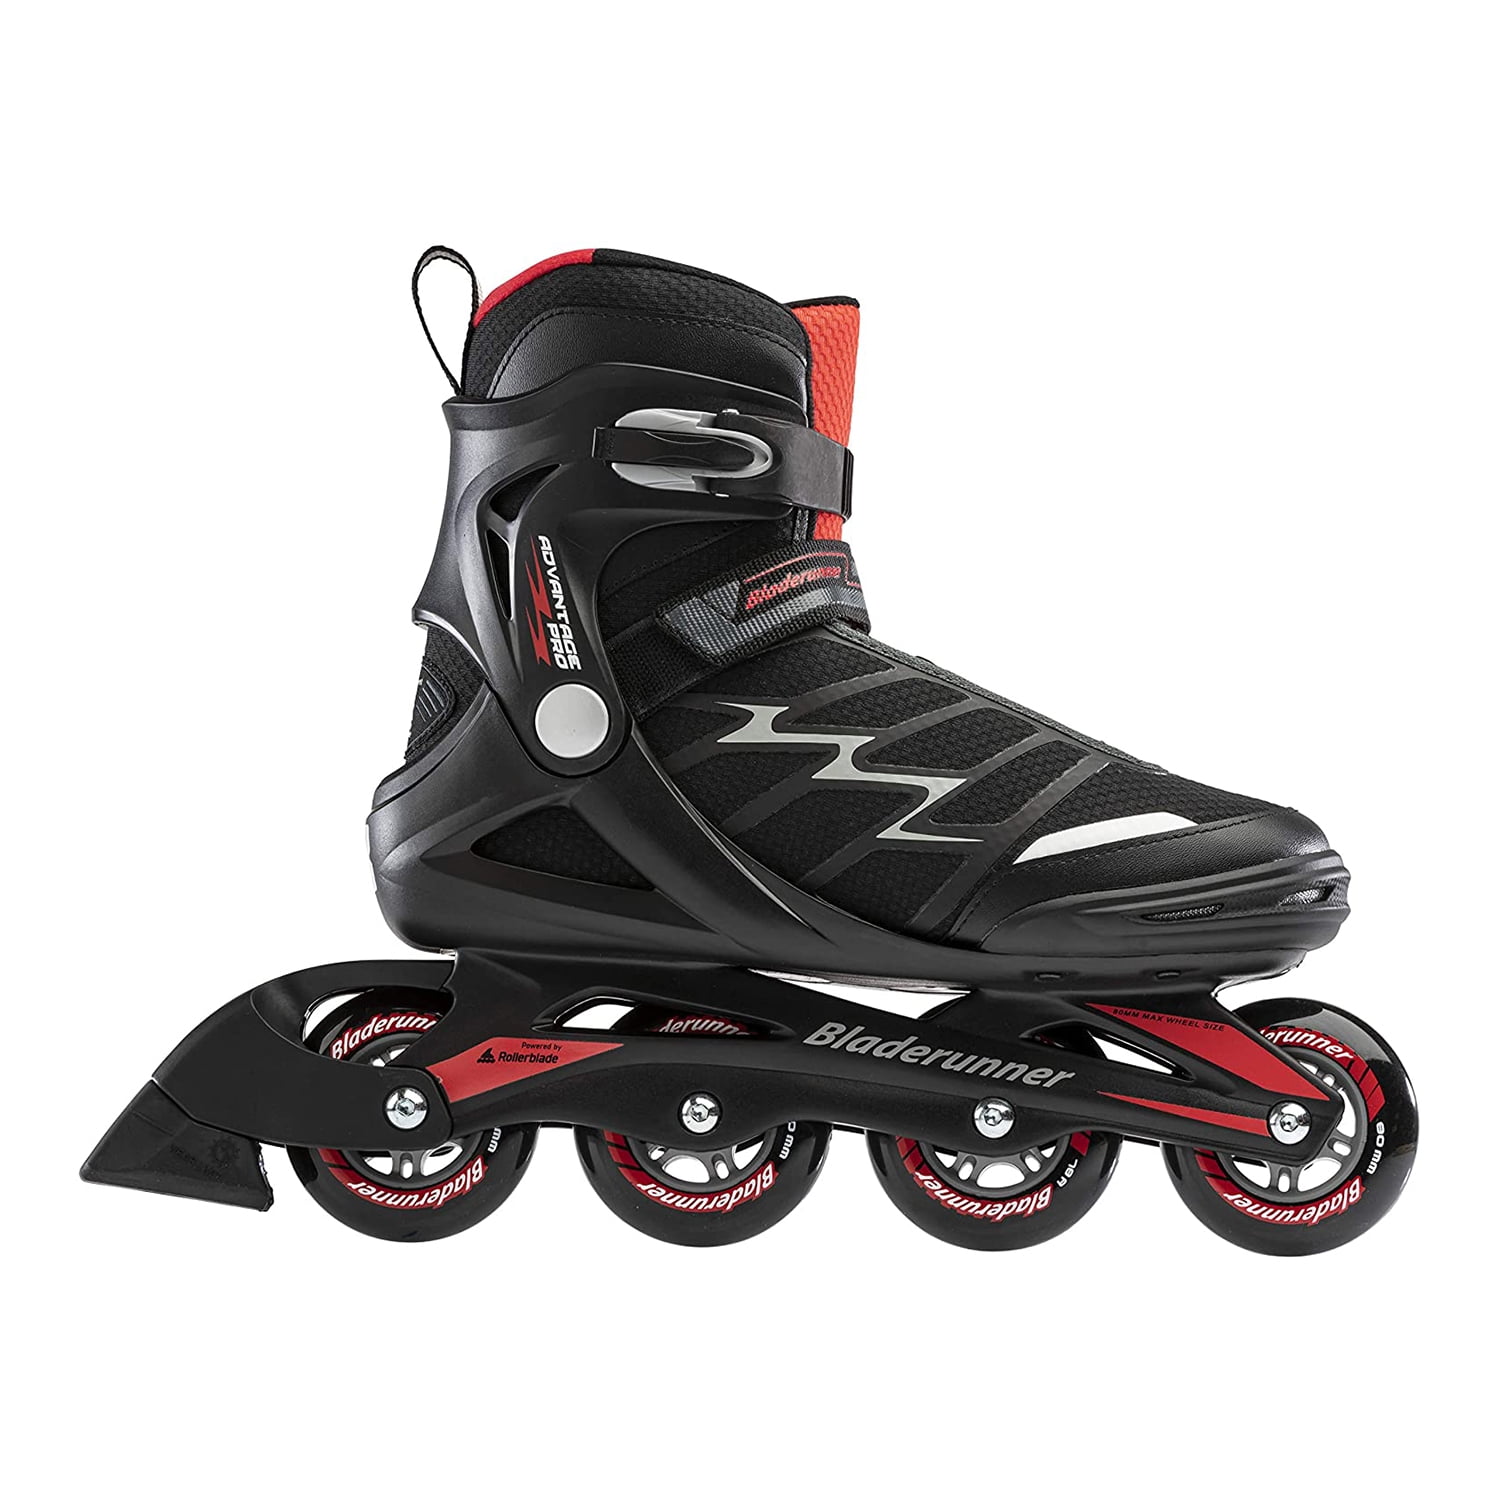 Rollerblade USA Macroblade 80 Mm Men's Adult Fitness Inline Skate Size 11 Lime for sale online 